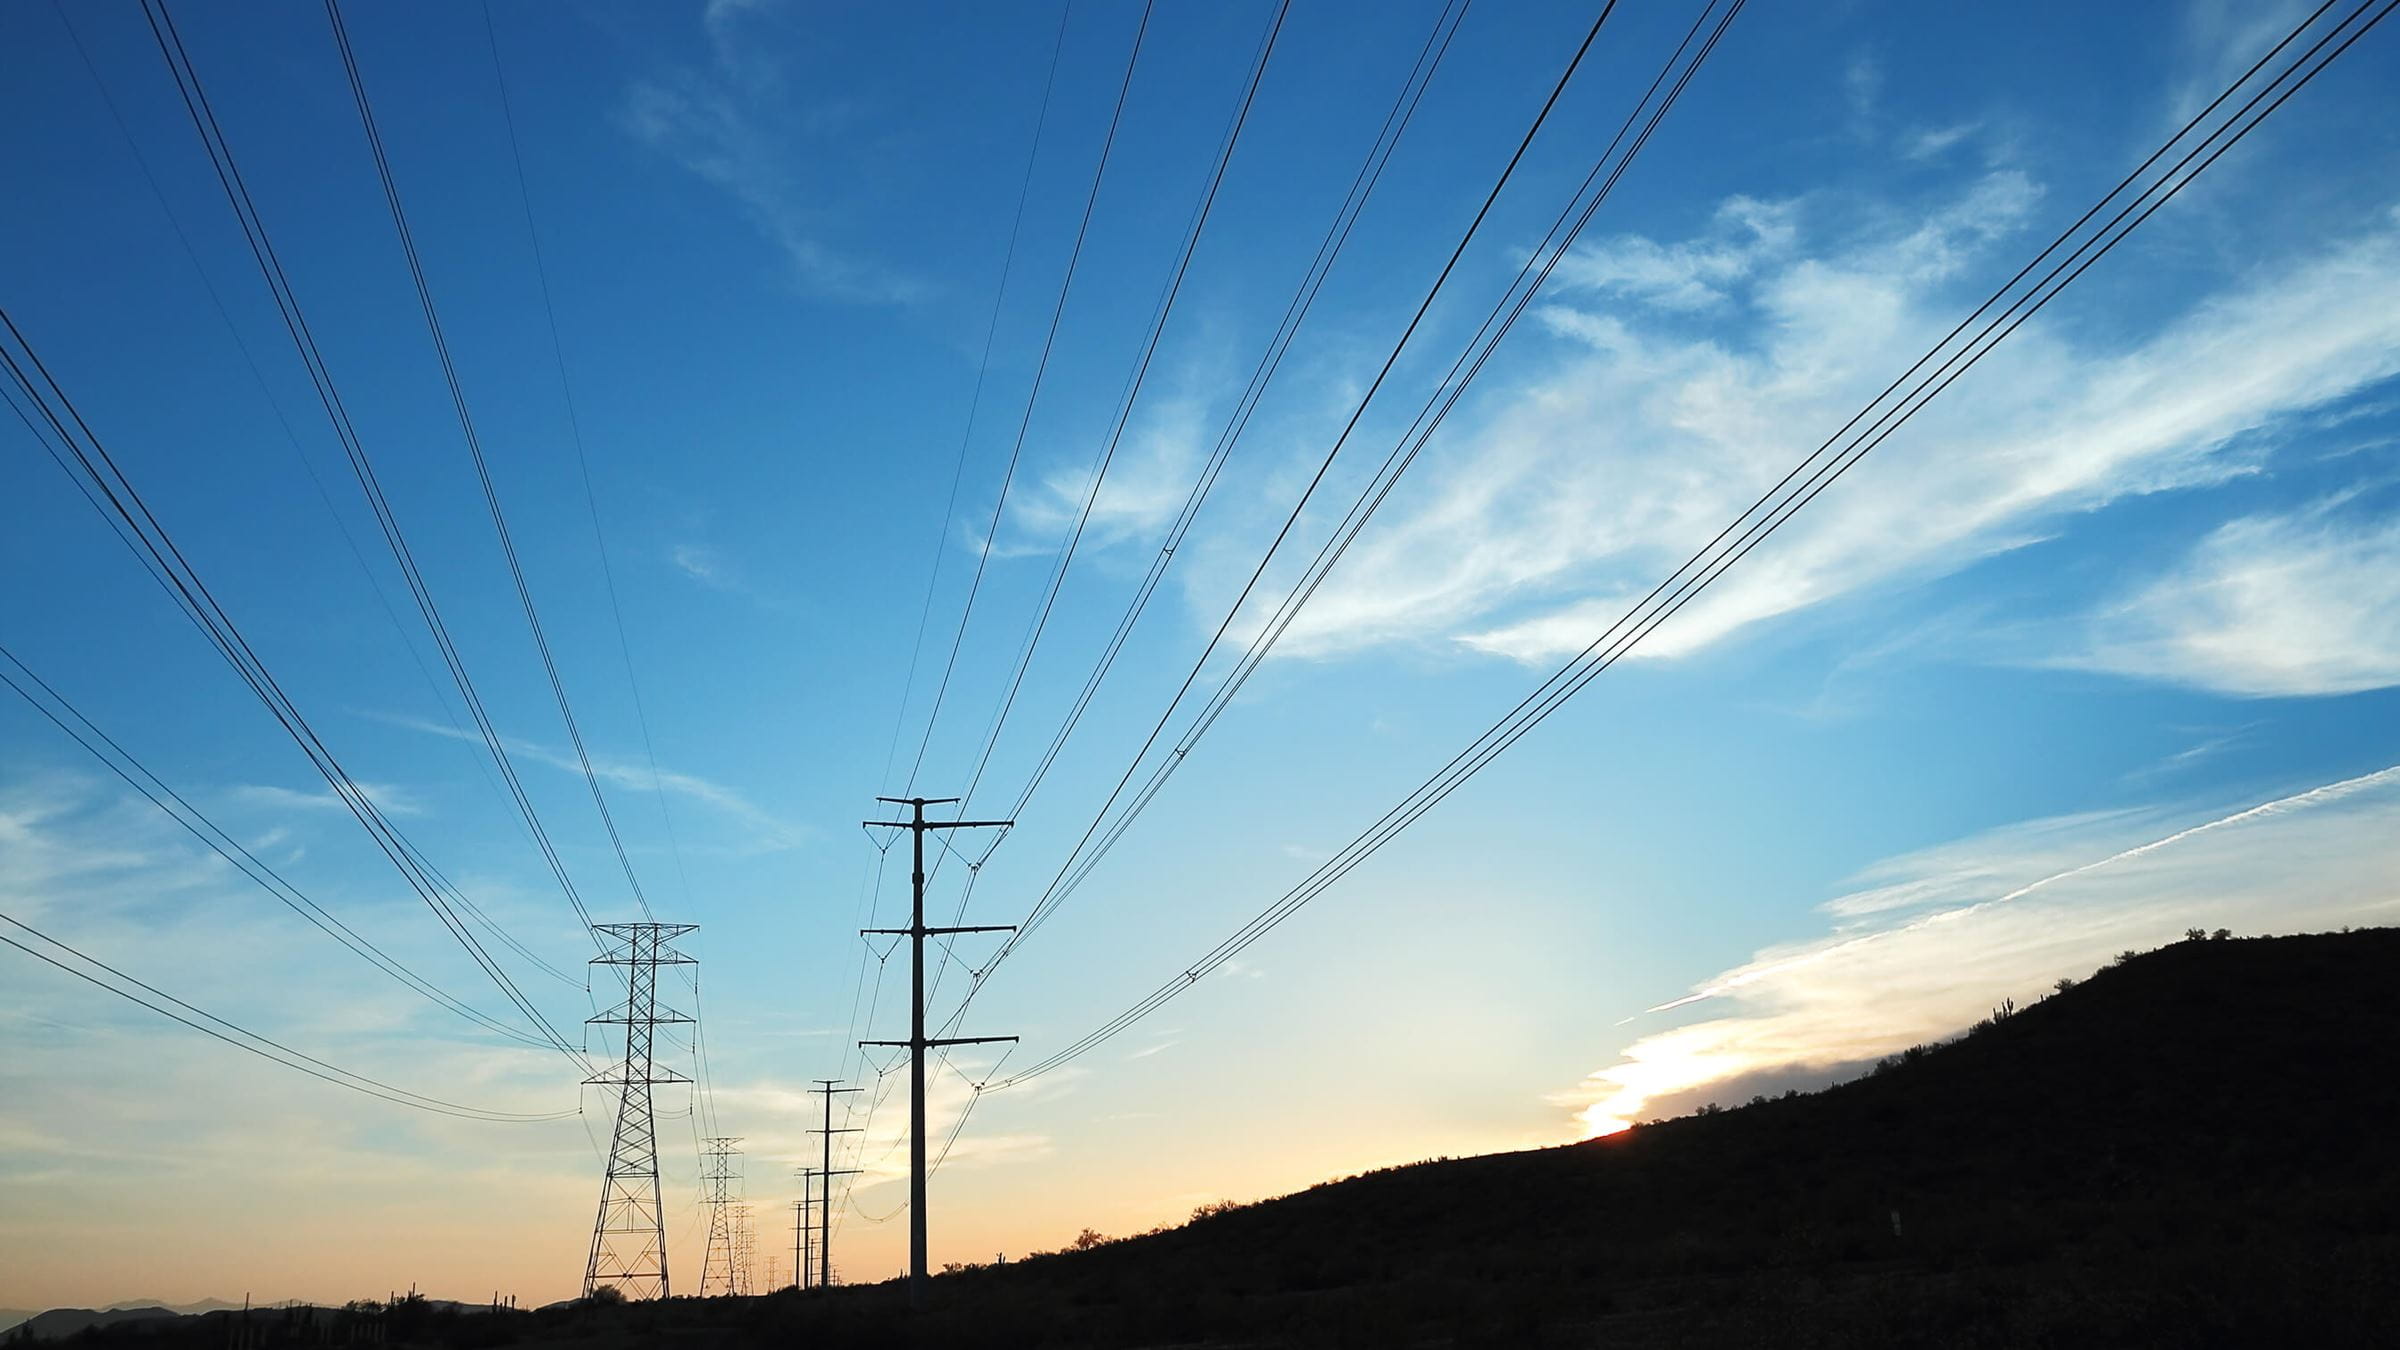 Transmission towers and power lines at sunset